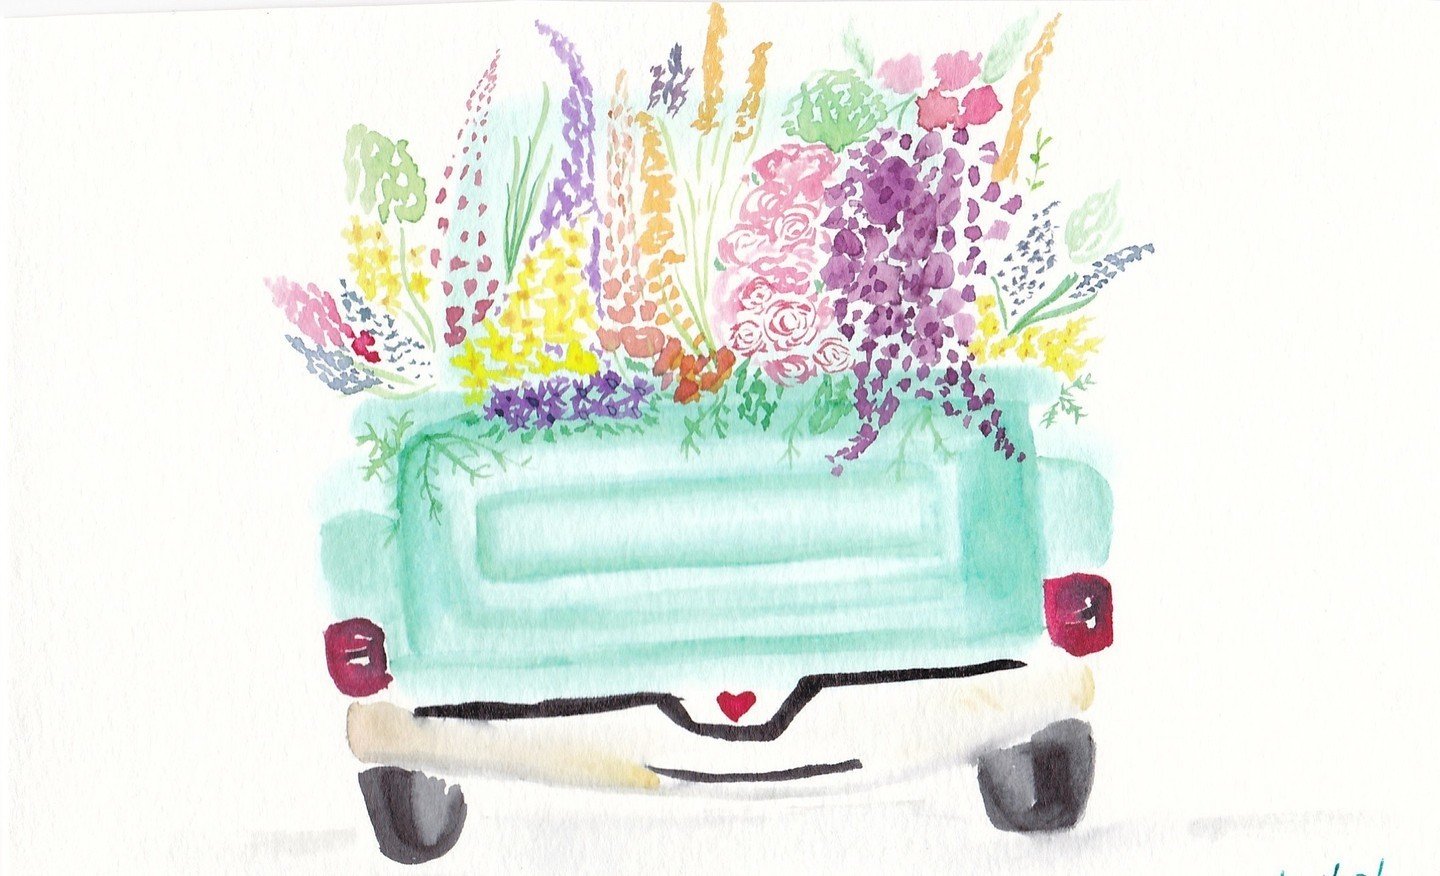 Flower Truck Dreams, watercolor by me! This original watercolor is printed on a 4x6 card, blank inside, with an envelope.⁠
⁠
I painted this in my first or second year of flower farming, filled with lofty dreams of an old Ford brimming with blooms to 